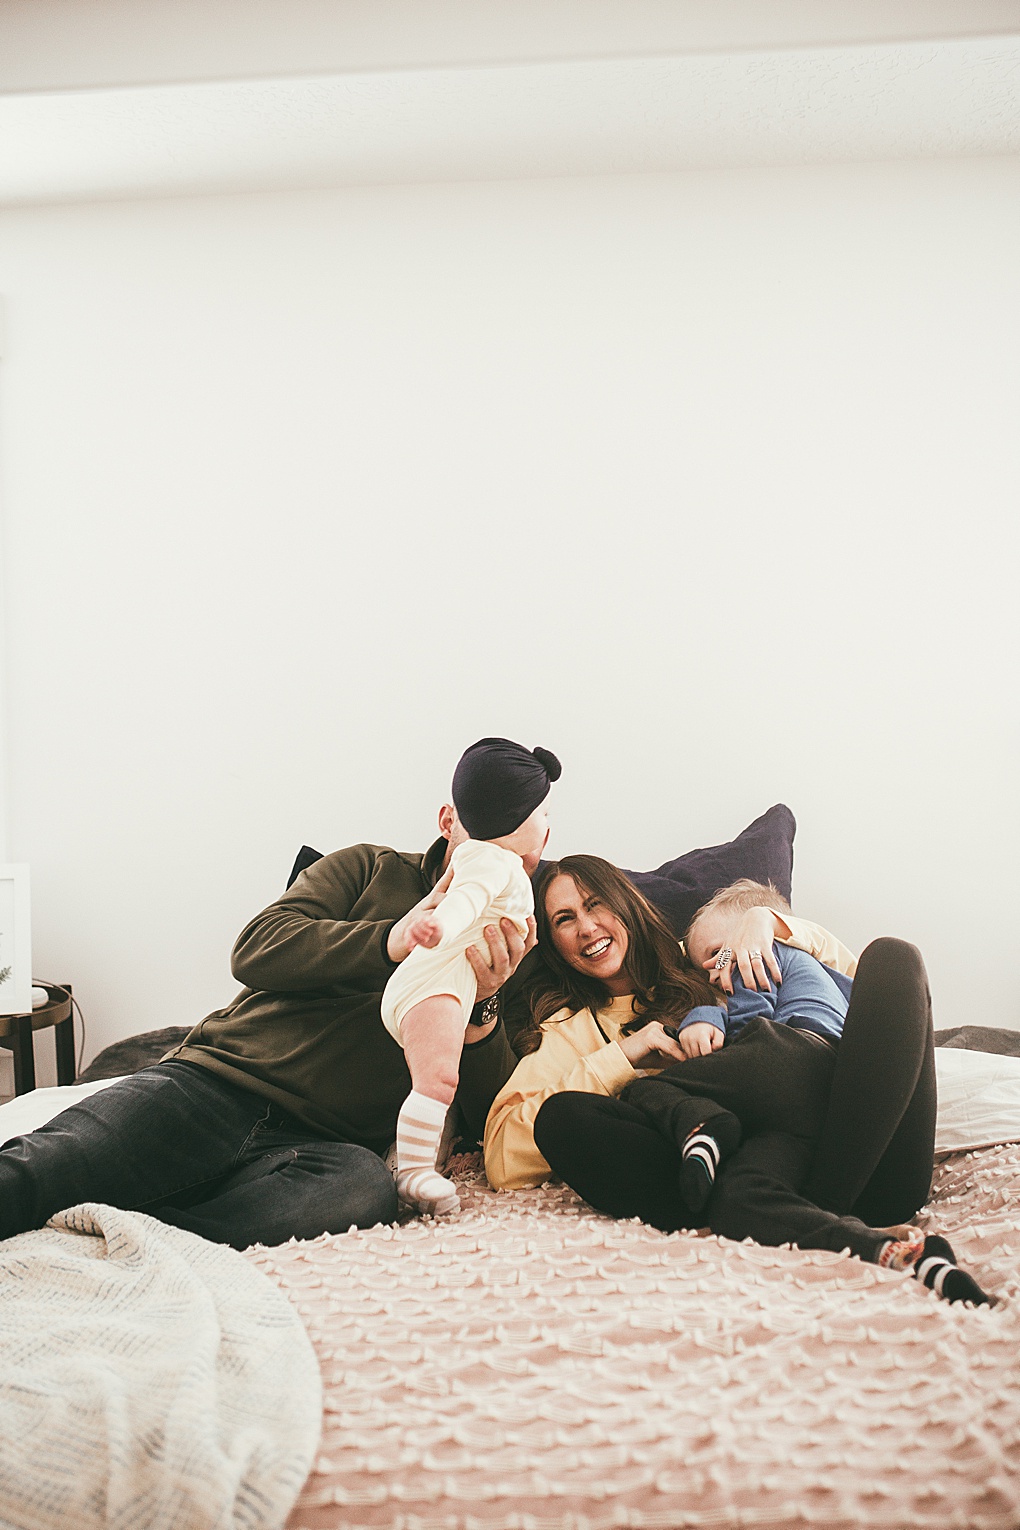 Looking for ways to be happy everyday? Utah Style Blogger Dani Marie is sharin her top 5 ways to be happy everyday that she does. Click to see them here!